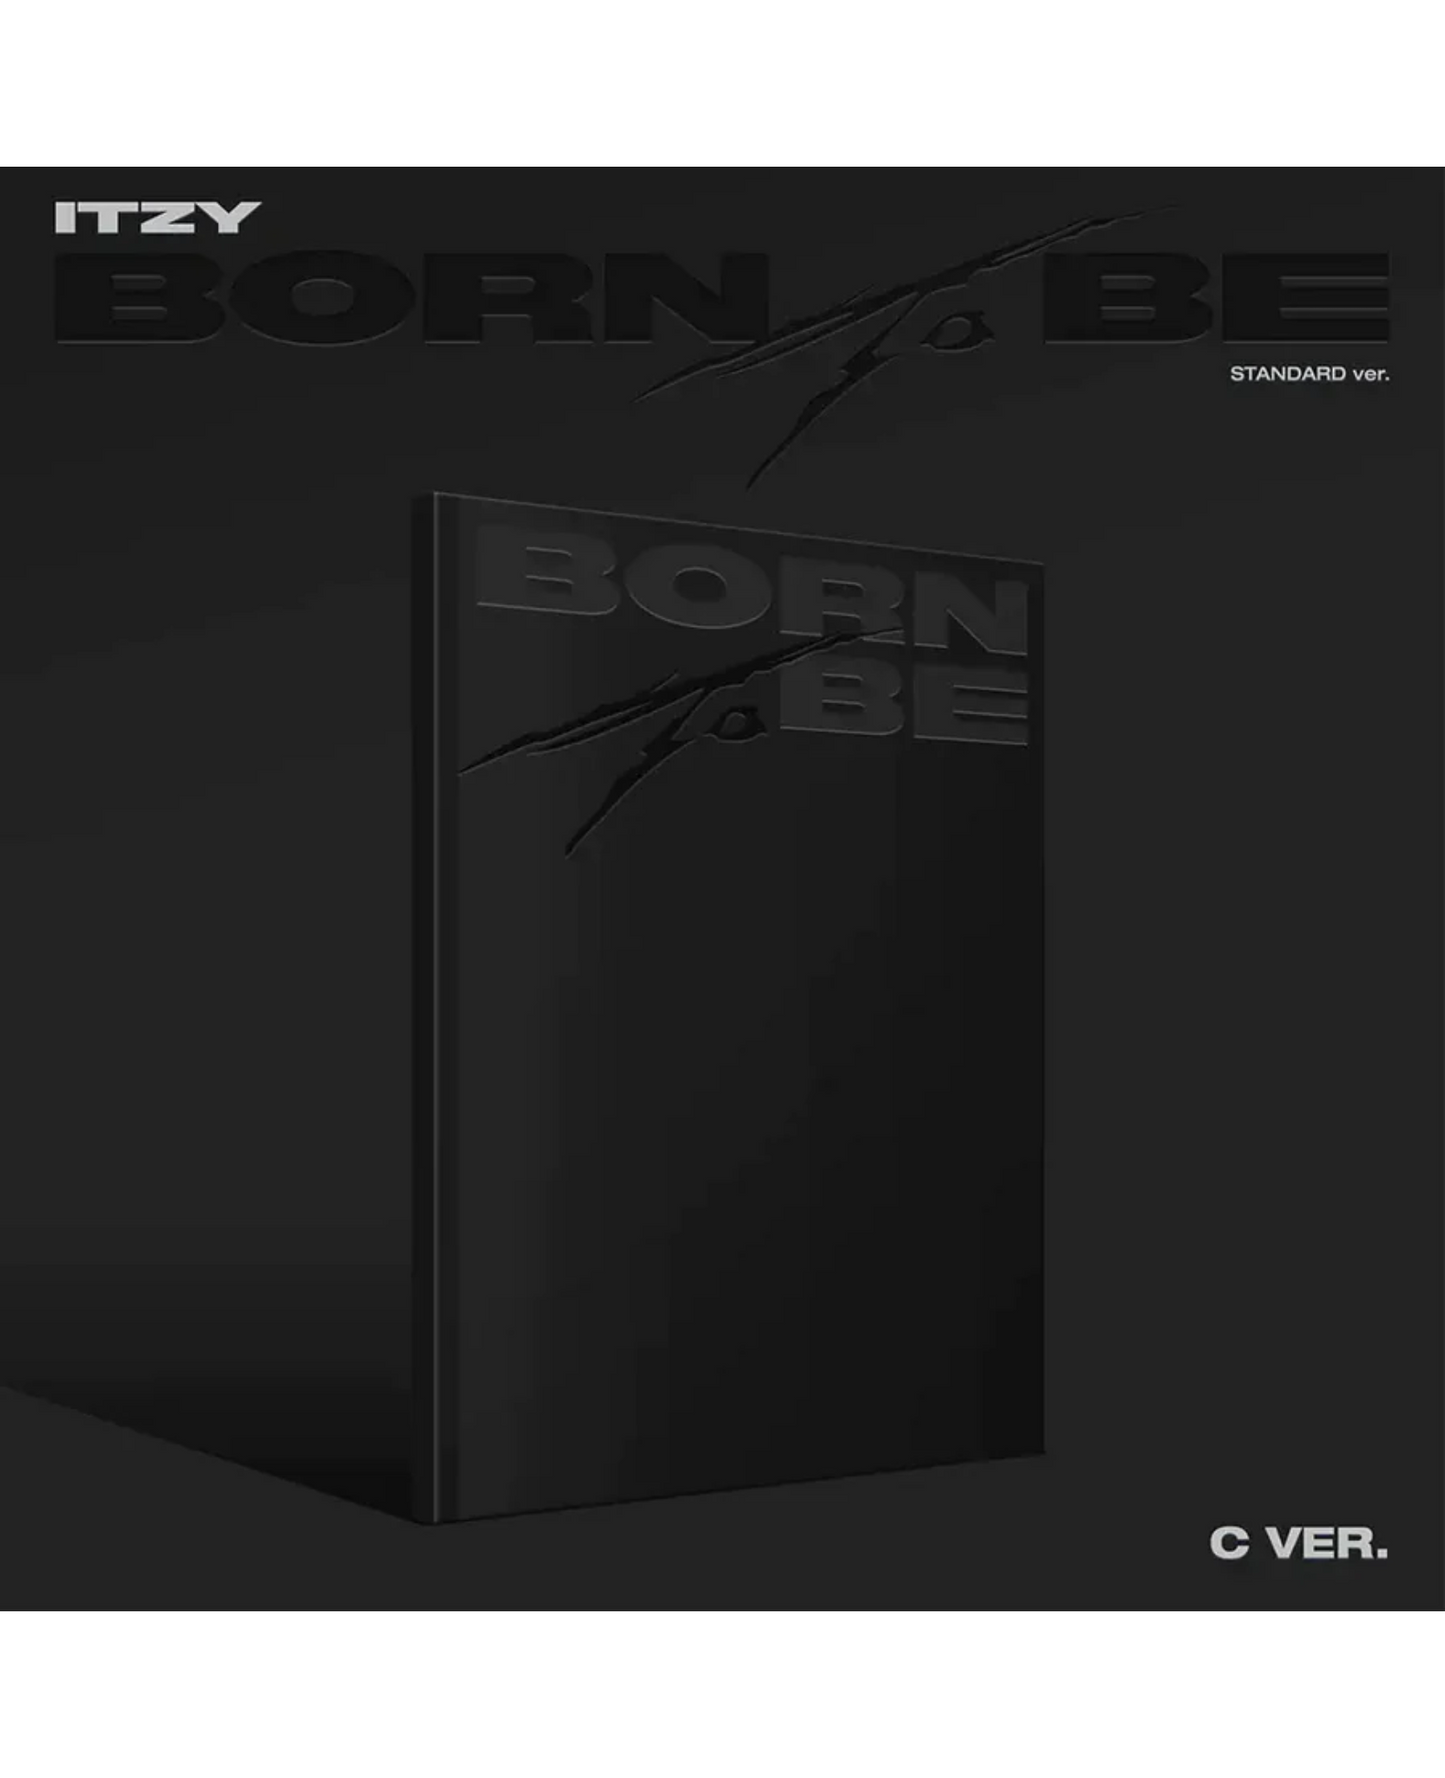 [COMING SOON] ITZY - BORN TO BE [Standard Ver.] ITZY